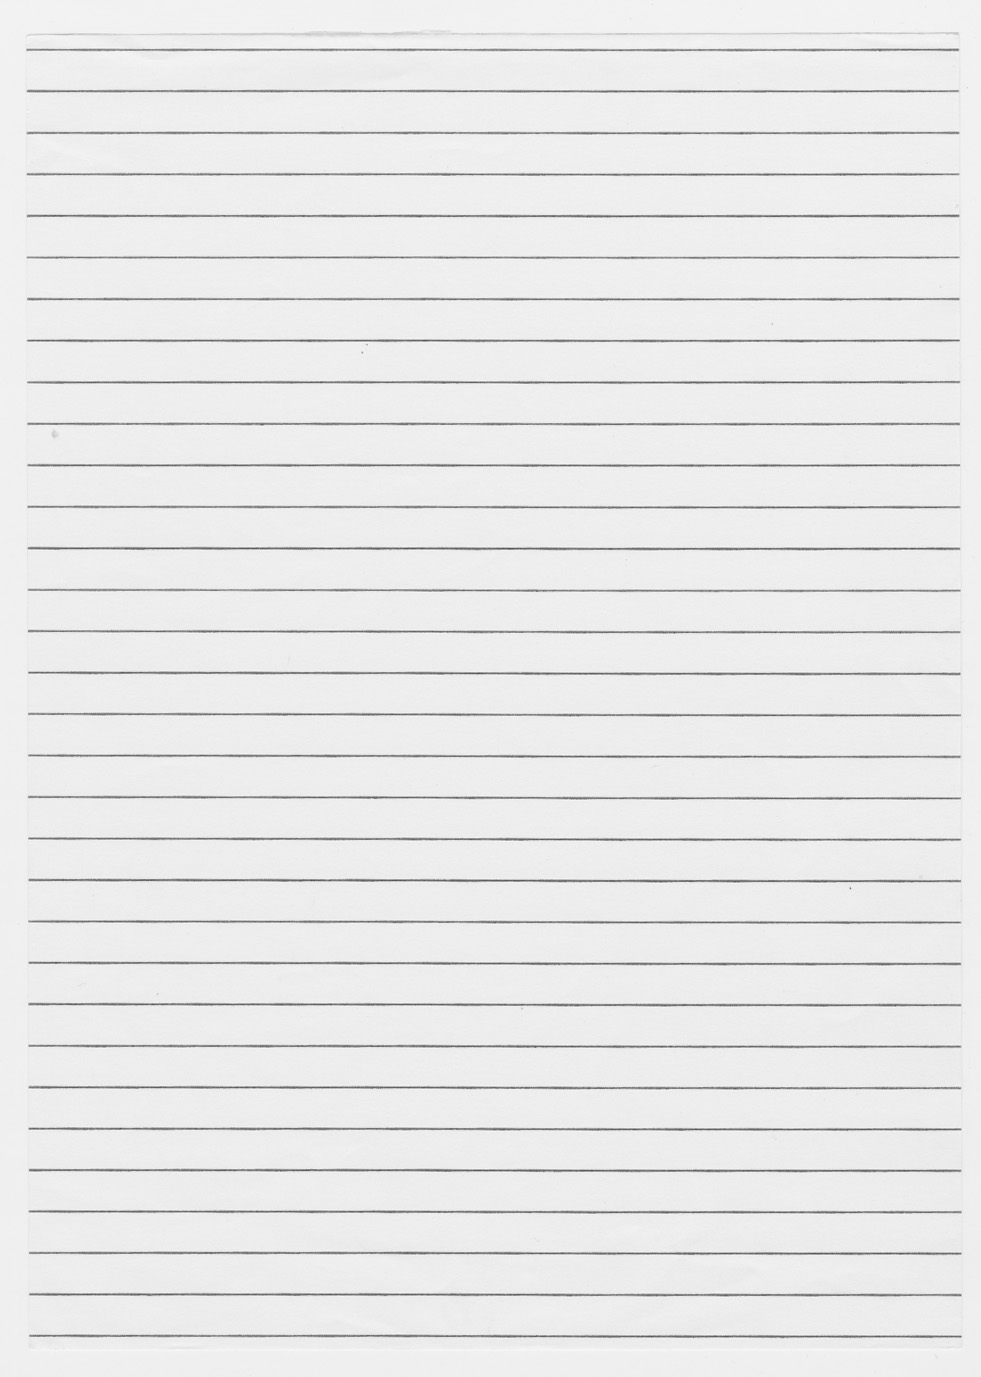 7 Best Images Of Black College Lined Paper Printable Free Printable 